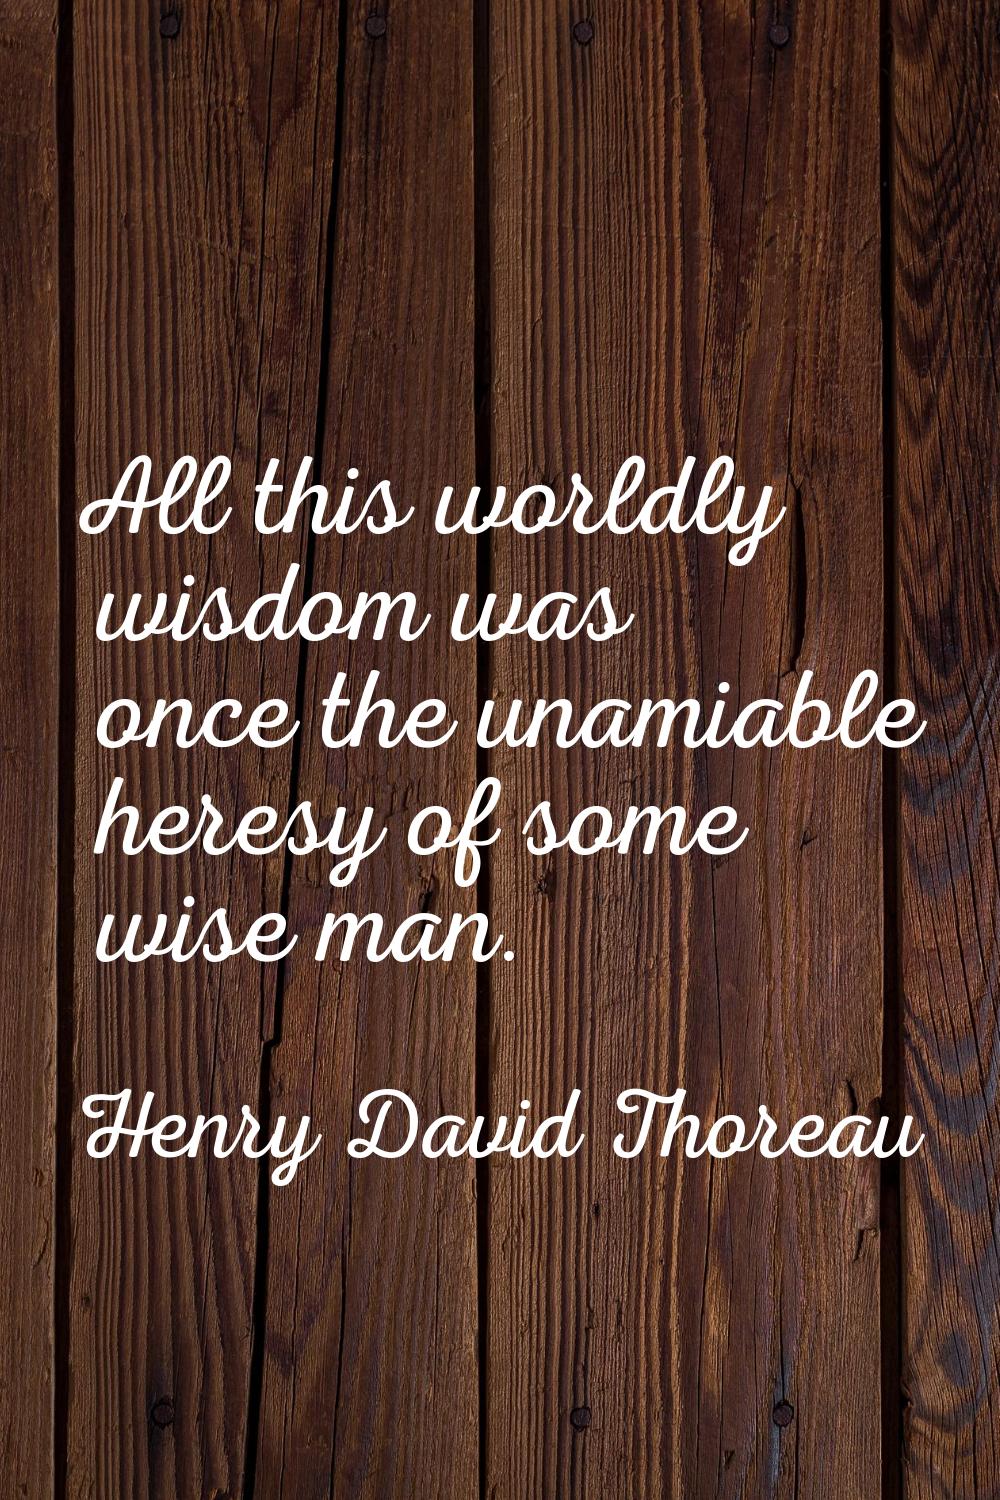 All this worldly wisdom was once the unamiable heresy of some wise man.